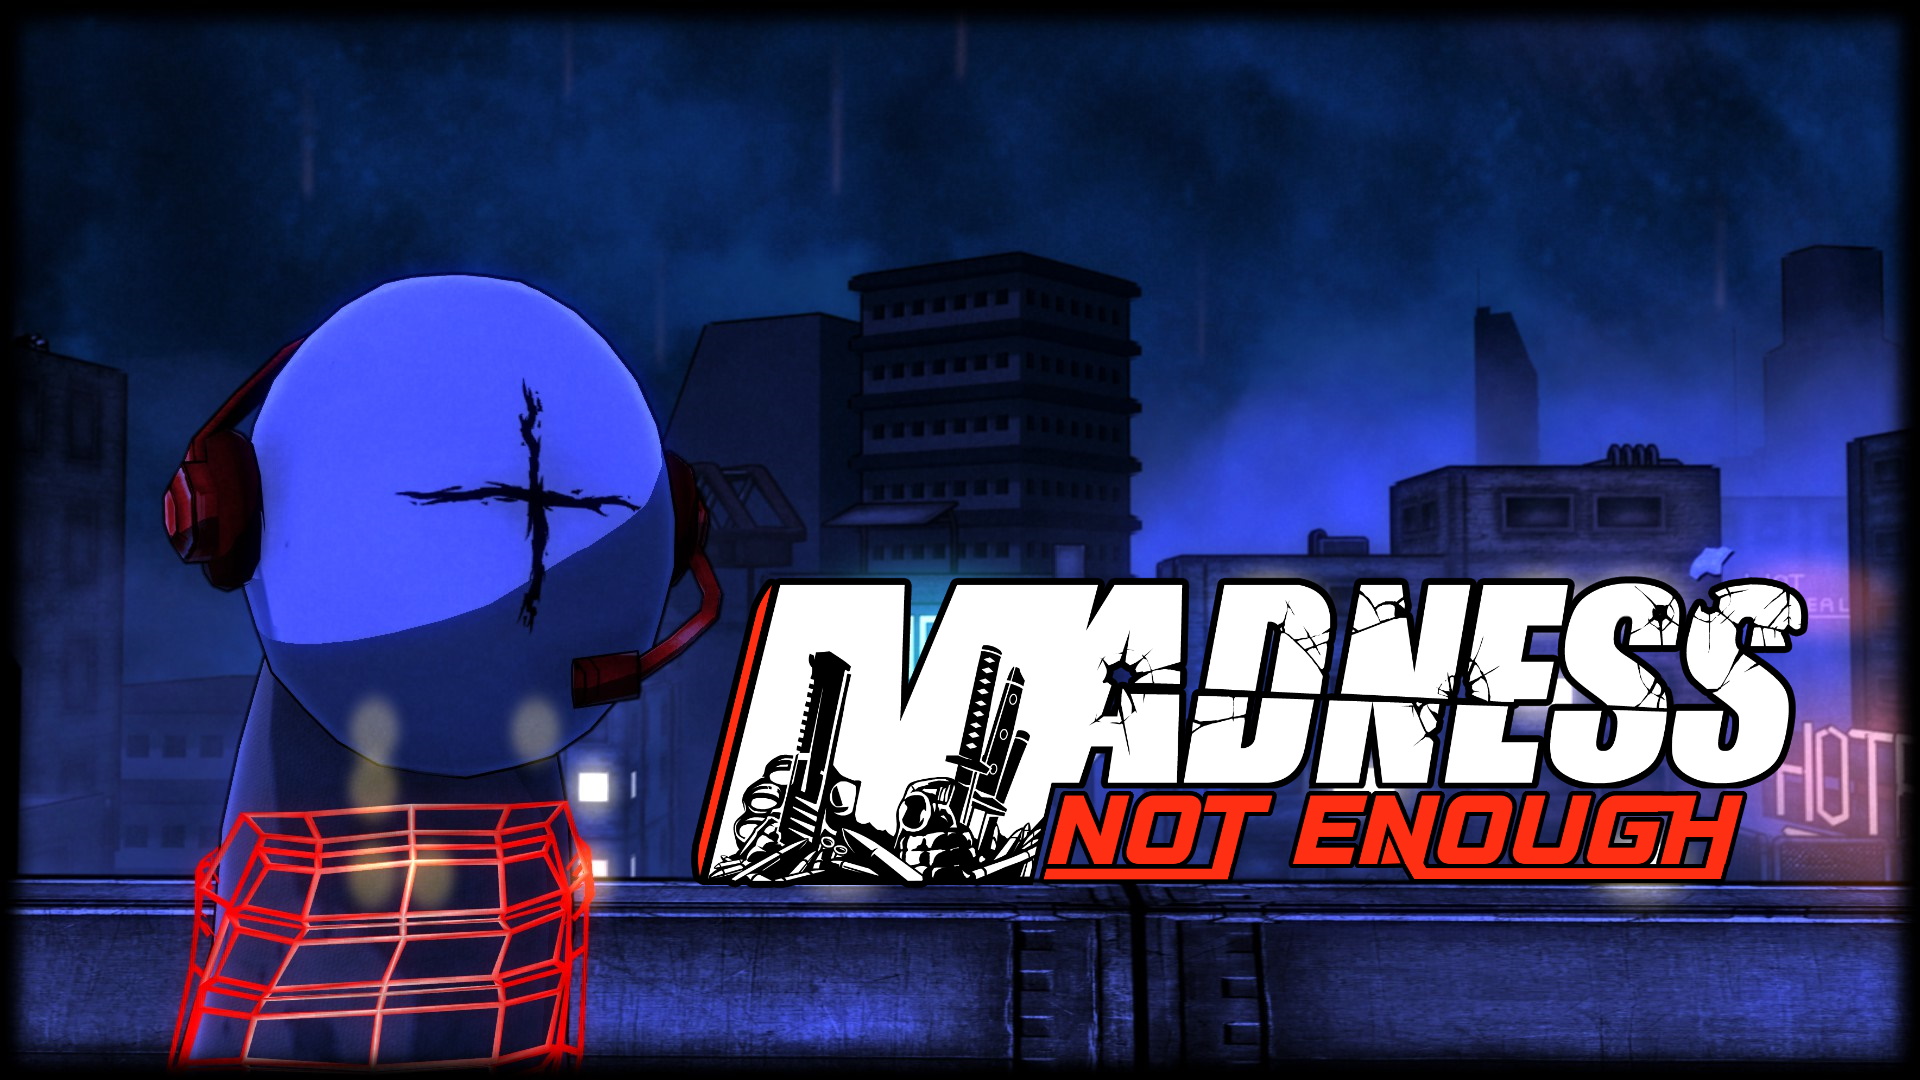 MADNESS 3D COMBAT free online game on